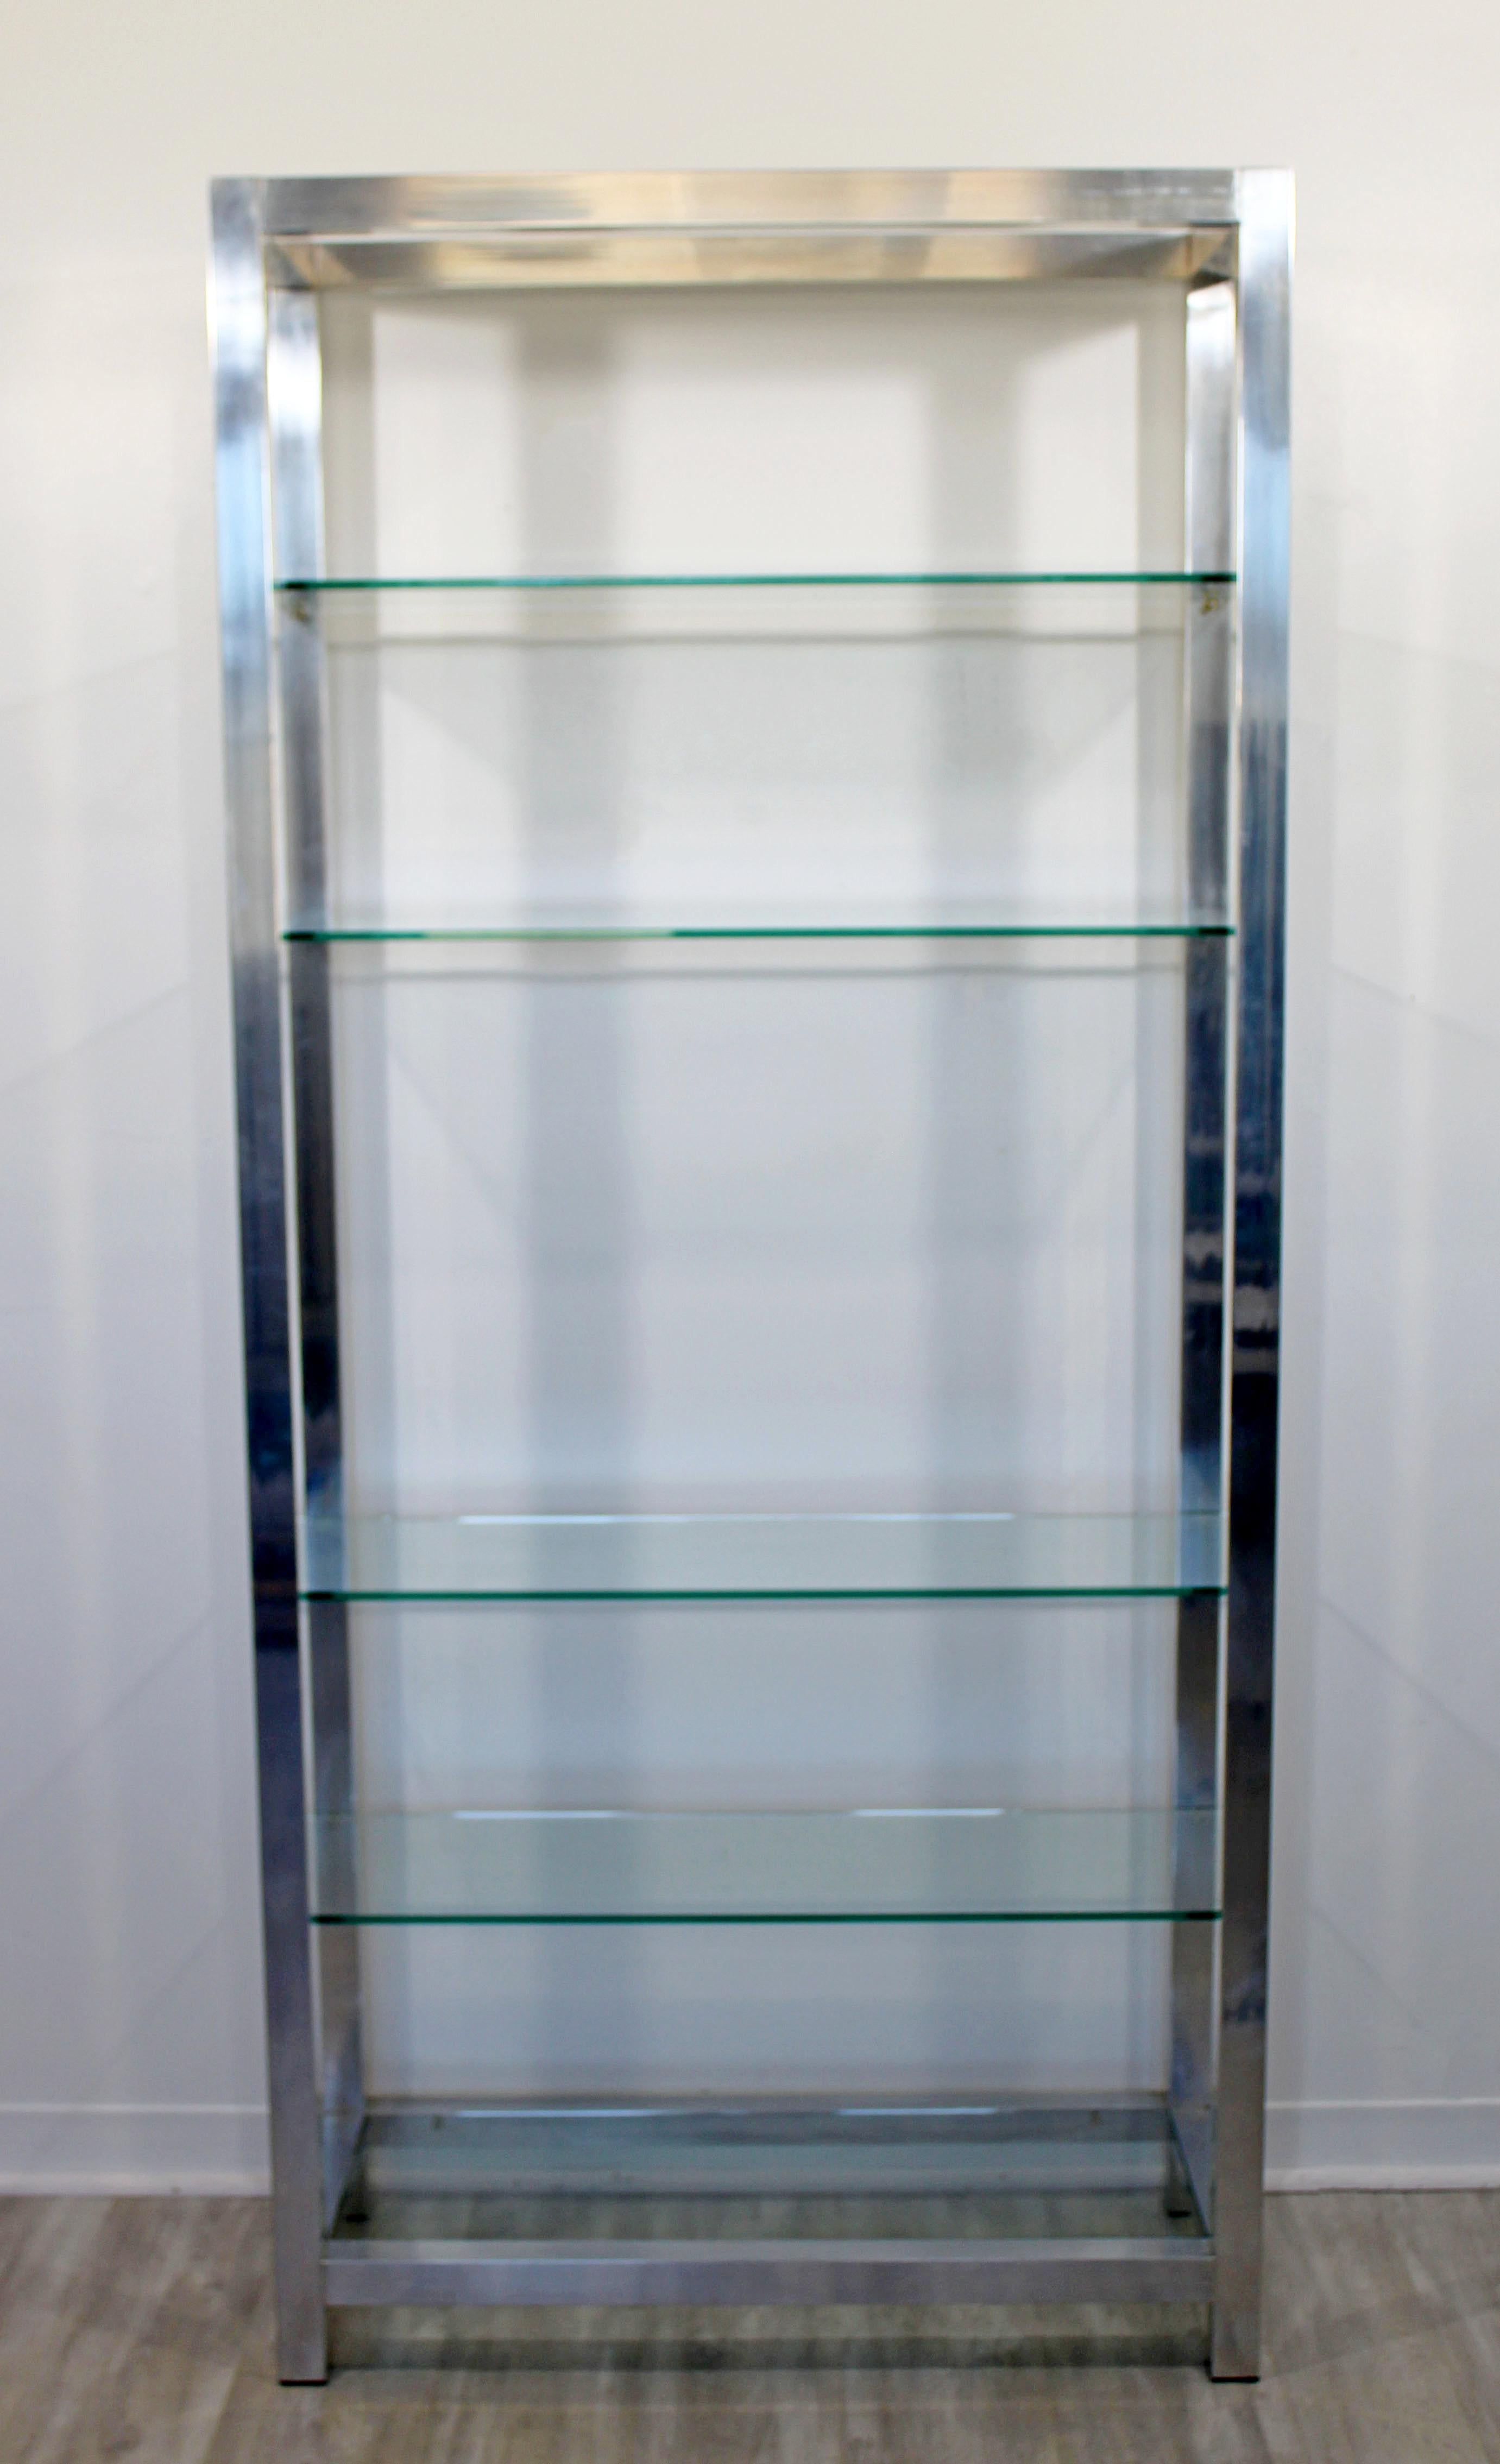 For your consideration is a Classic, aluminum shelving unit étagère, with five glass shelves, circa the 1970s. In very good condition, with a blemish in a shelf and some scuffing on the aluminum. The dimensions are 36